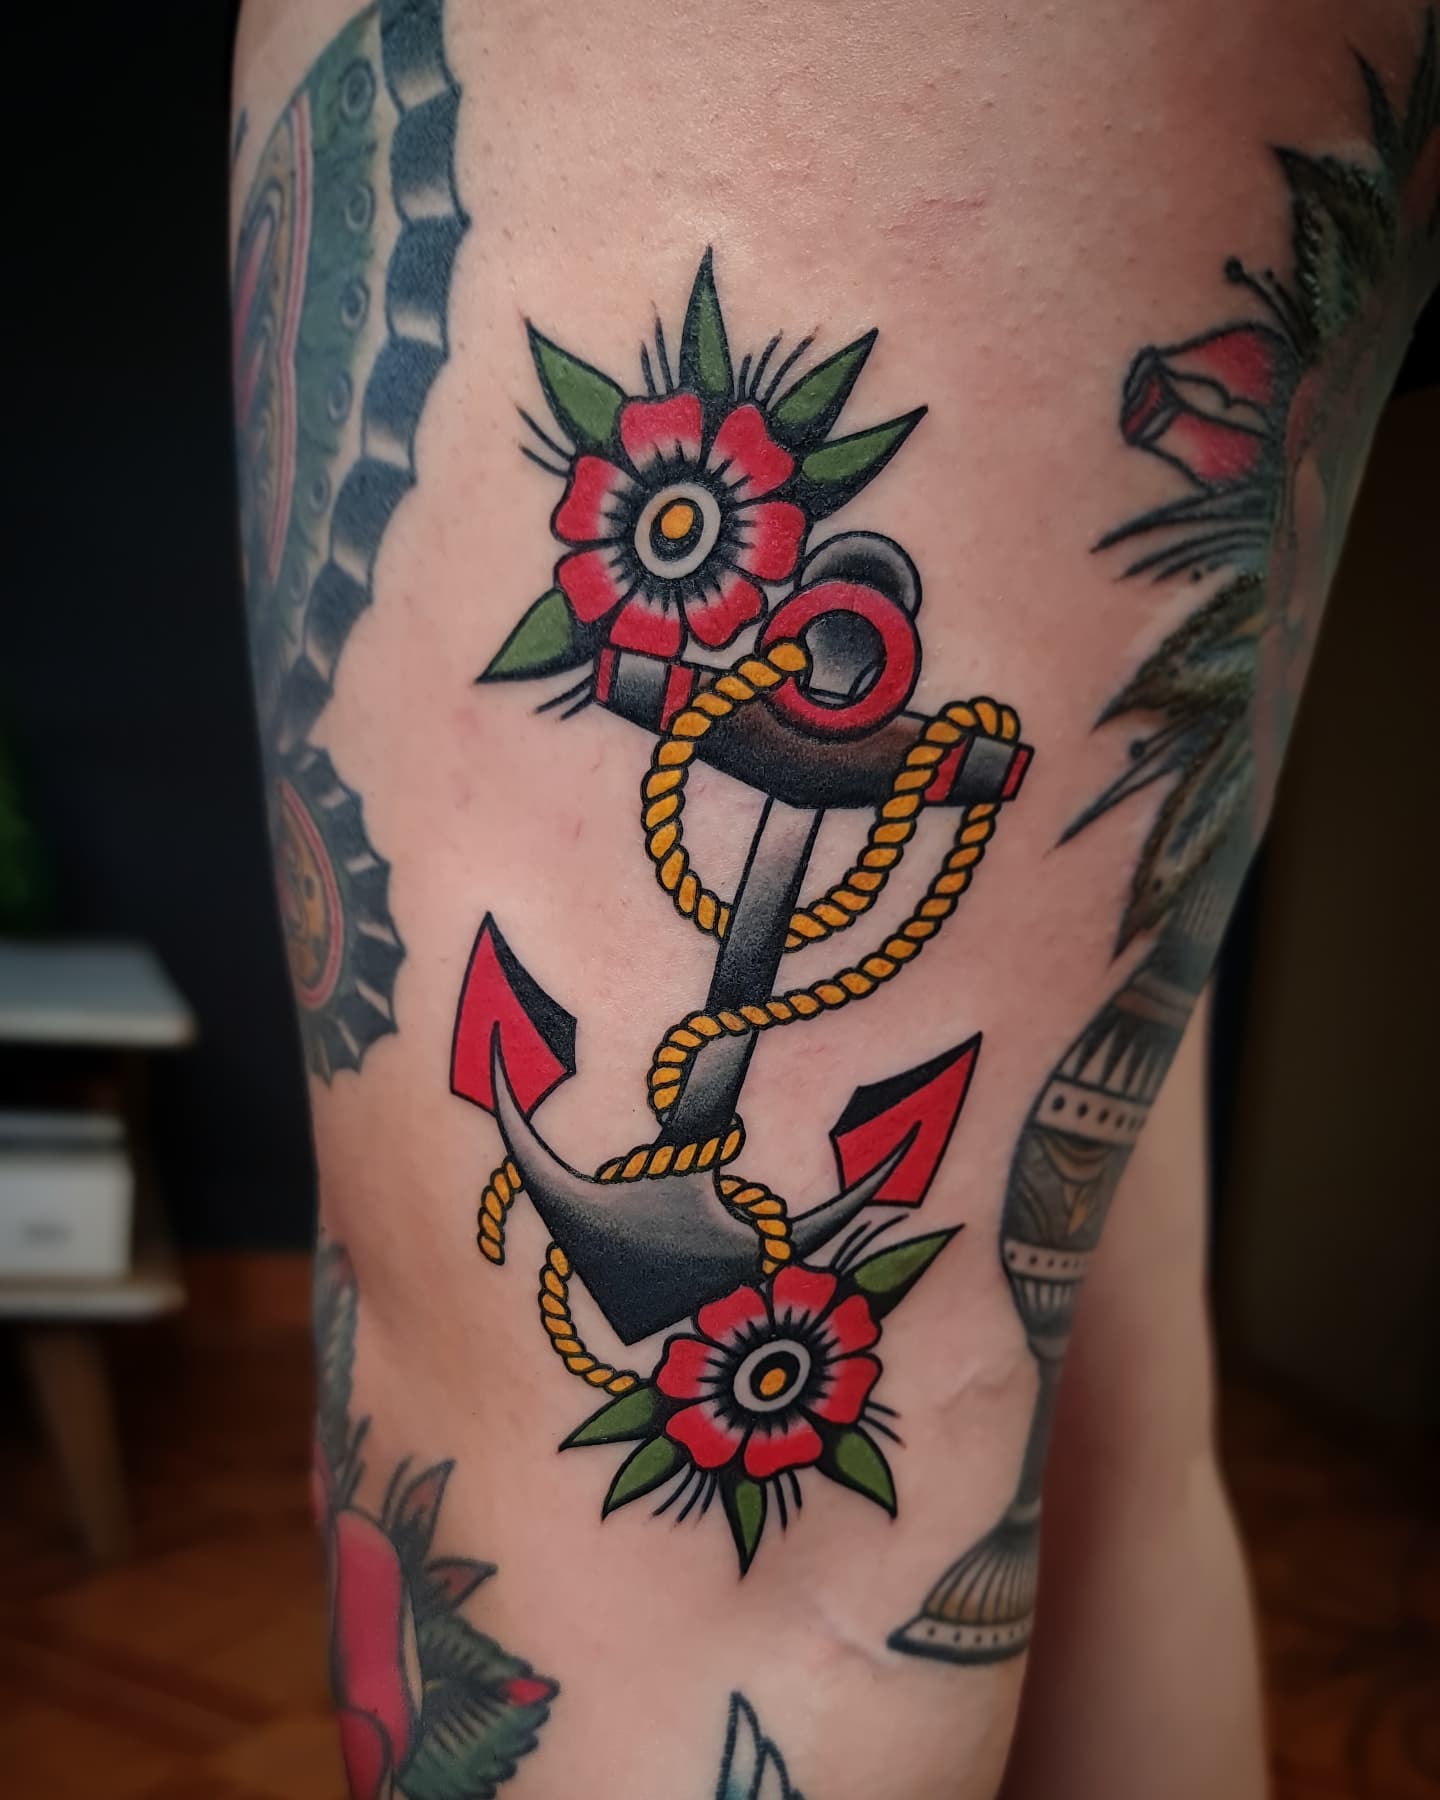 traditional anchor tattoo for women